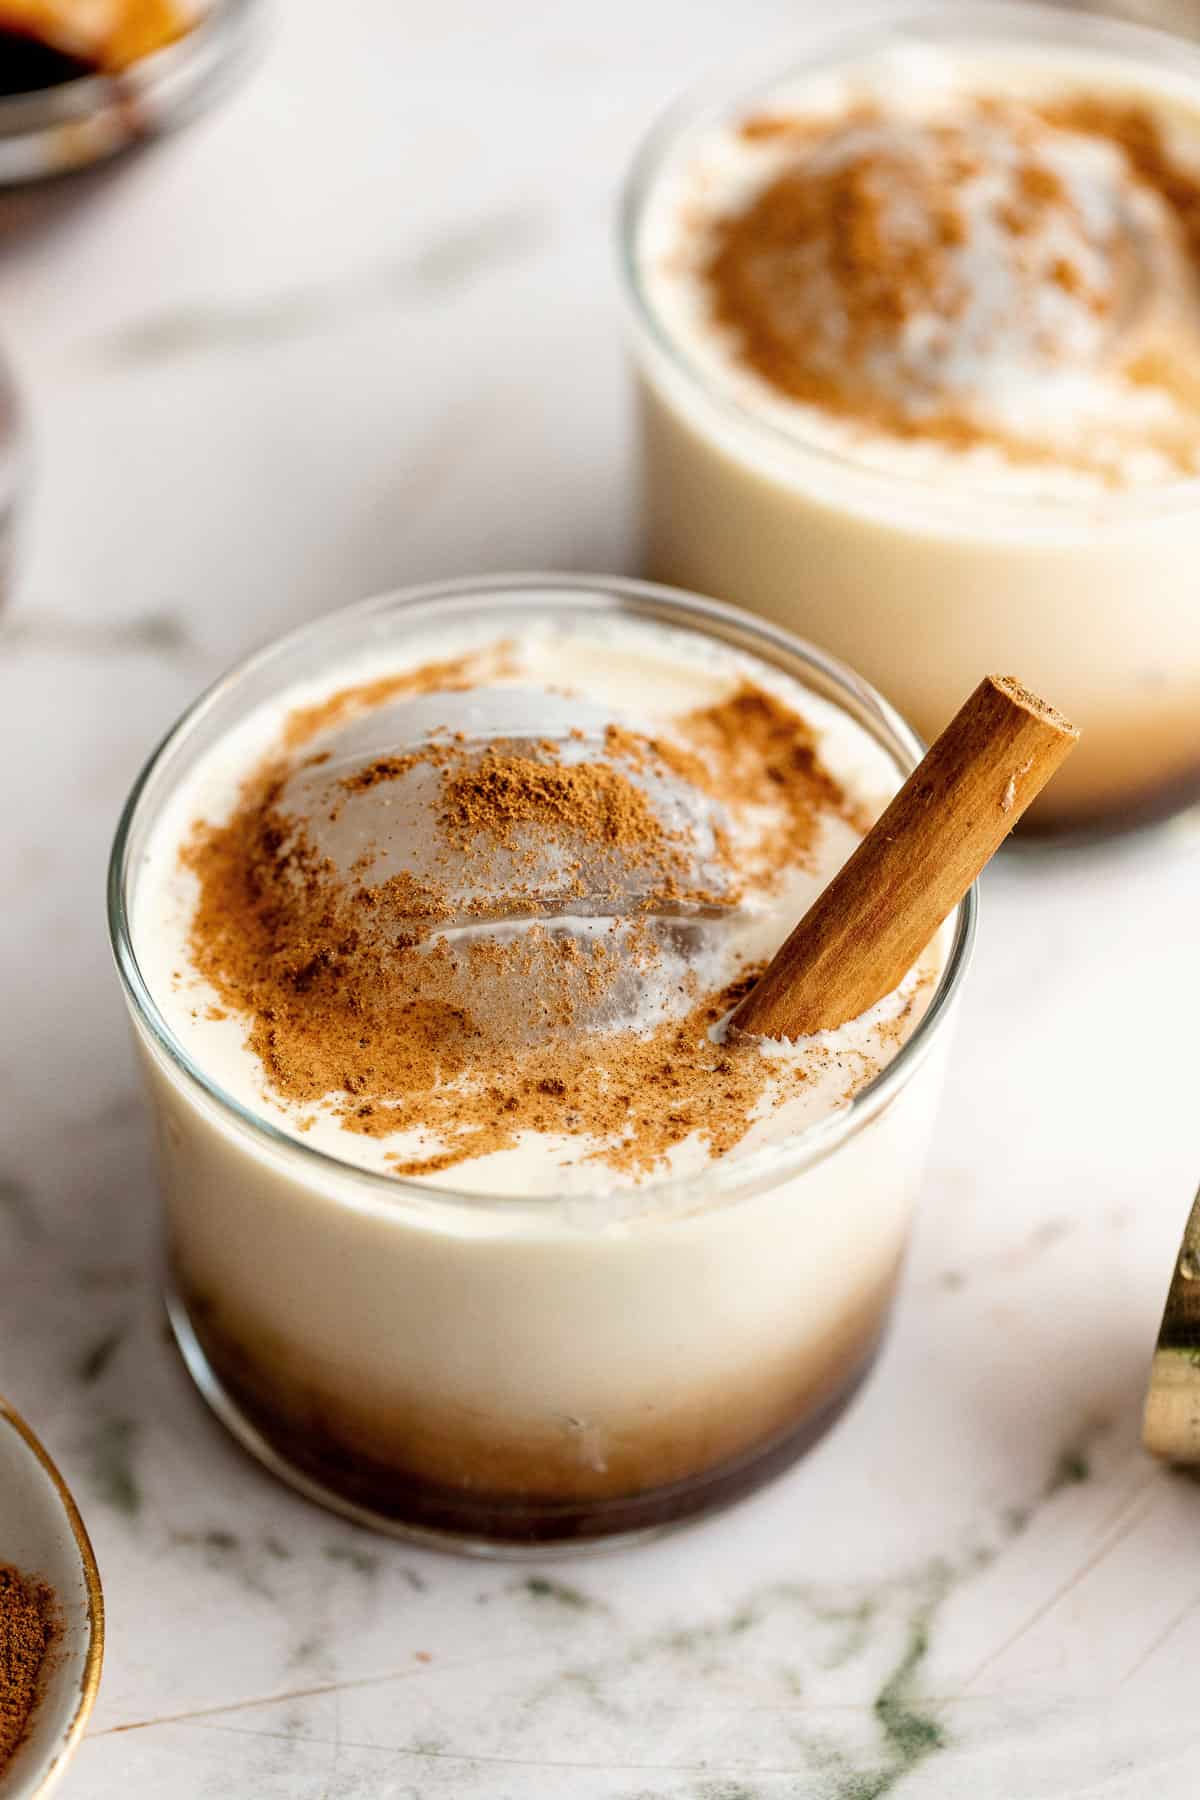 Two Gingerbread White Russian cocktails with cinnamon sticks in it on a white background.